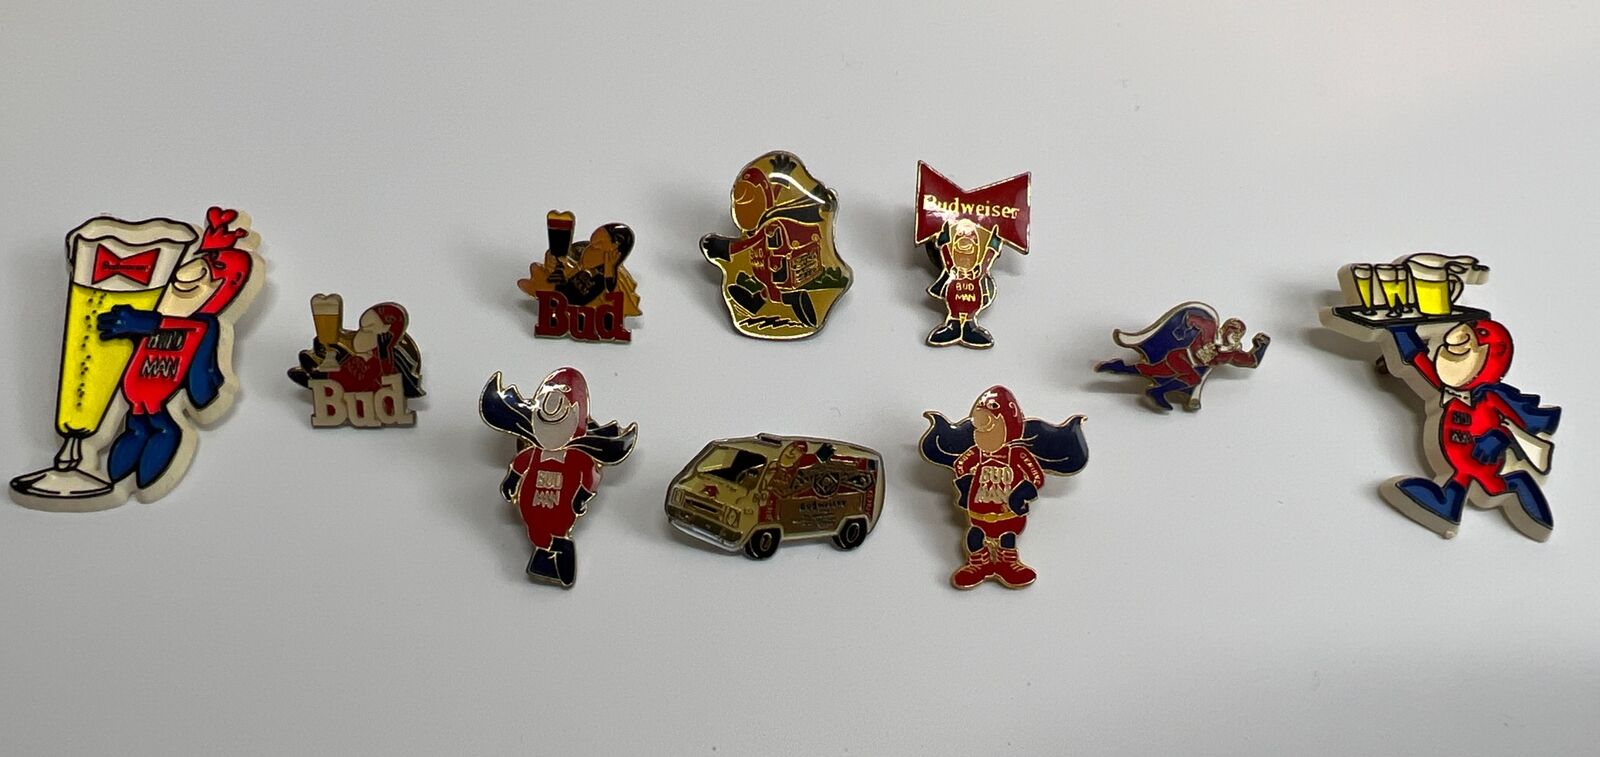 Vintage Lot Set of 10 Budweiser Bud Man Pins Beer Collectibles